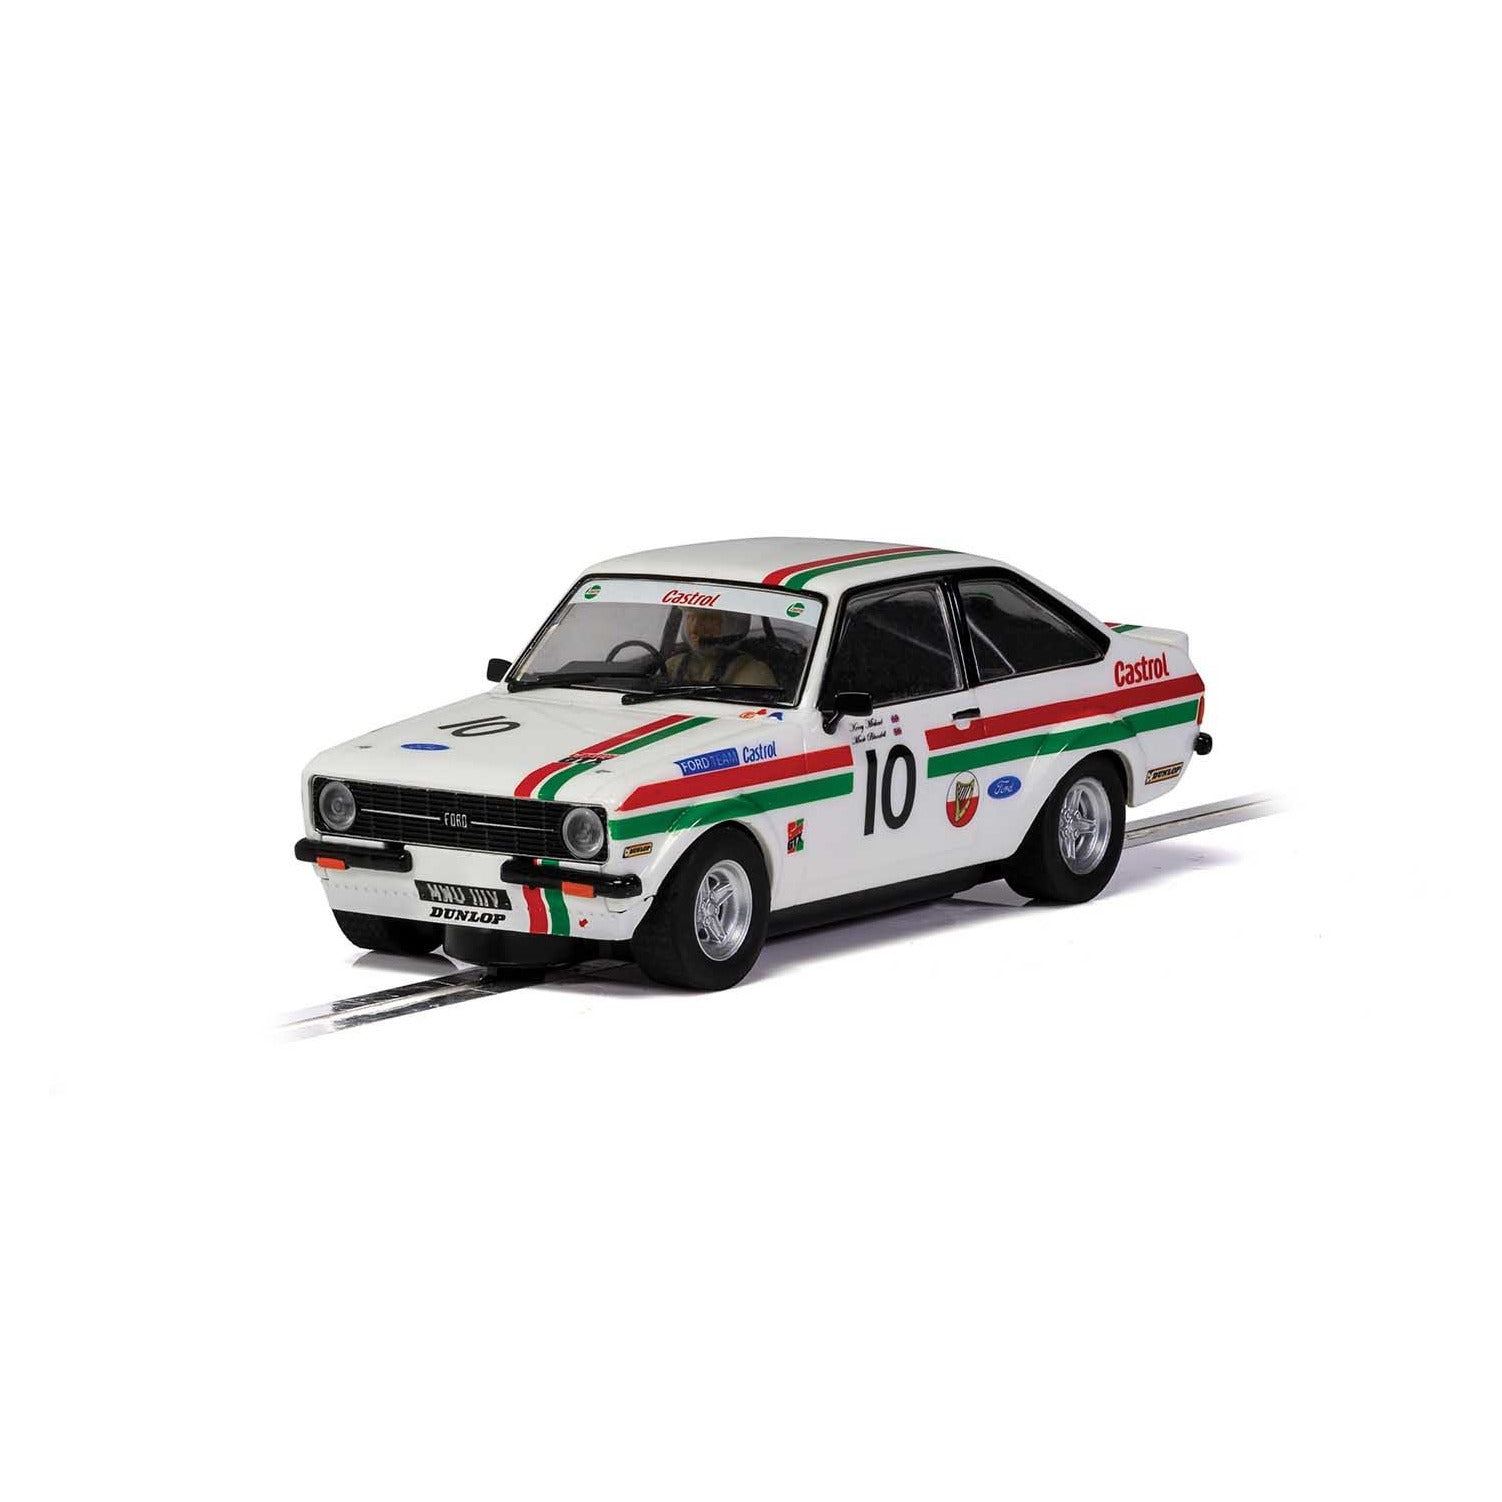 Ford Escort MKII Slot Car by Scalextric